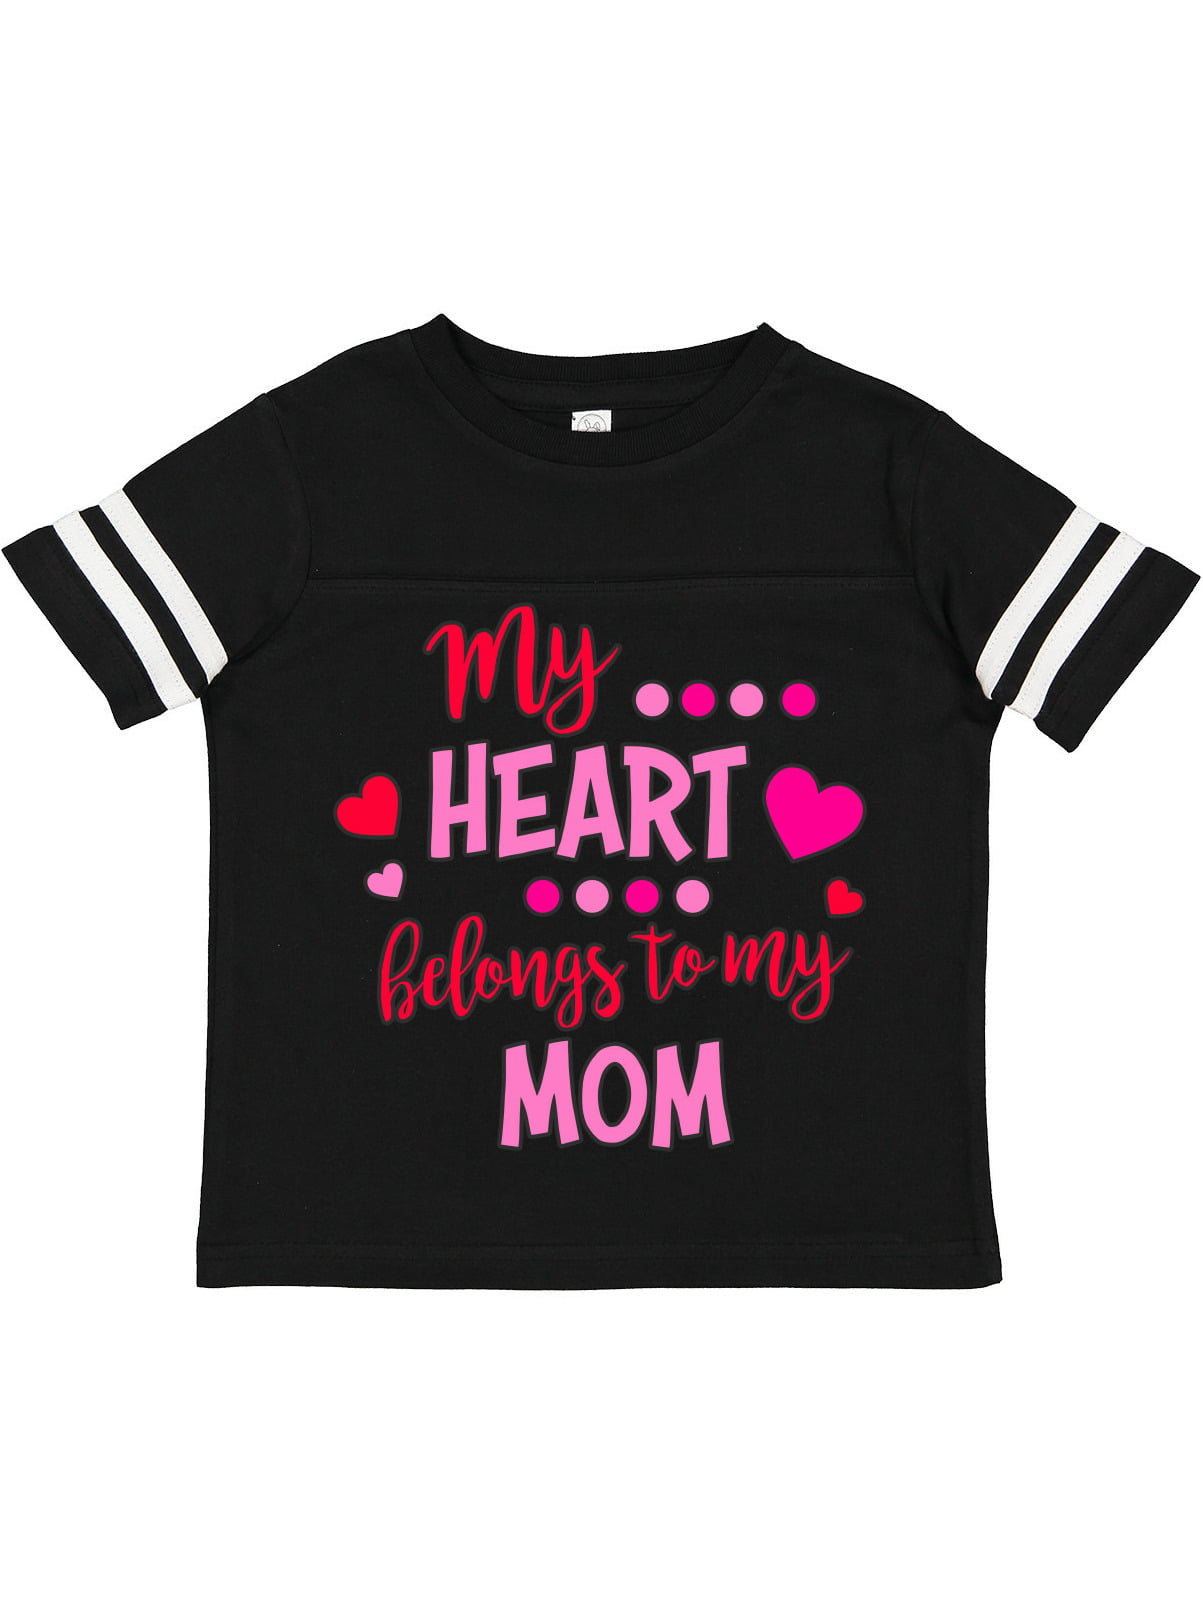 Your heart belongs to your mom Short-Sleeve Unisex T-Shirt